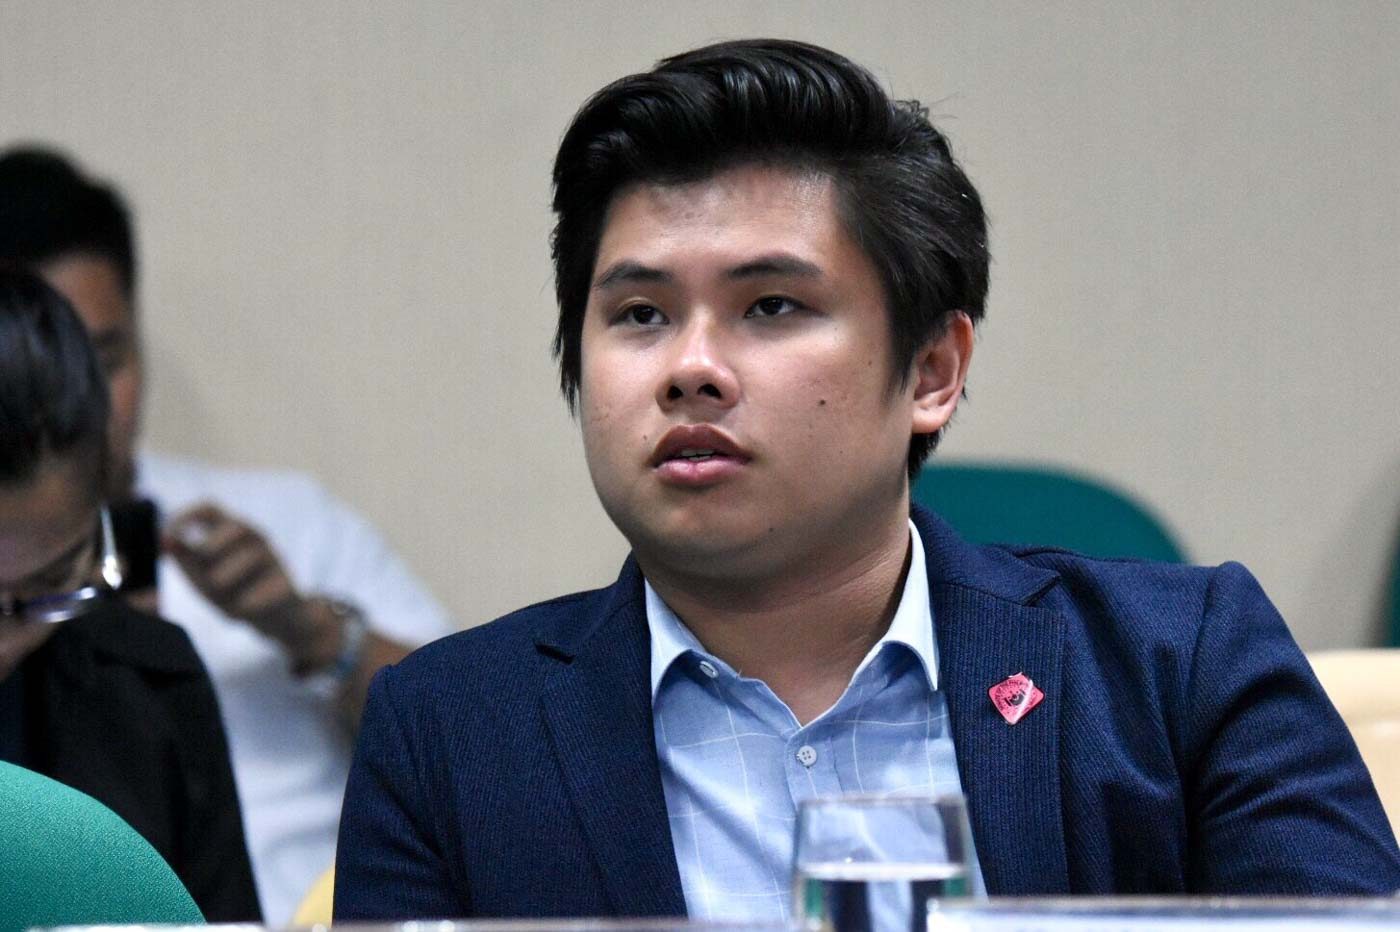 SK OFFICIAL. Quezon City SK Federation president Noe Lorenzo dela Fuente at the Senate hearing on the postponement of barangay and SK elections on September 10, 2019. Photo by Angie de Silva/Rappler 